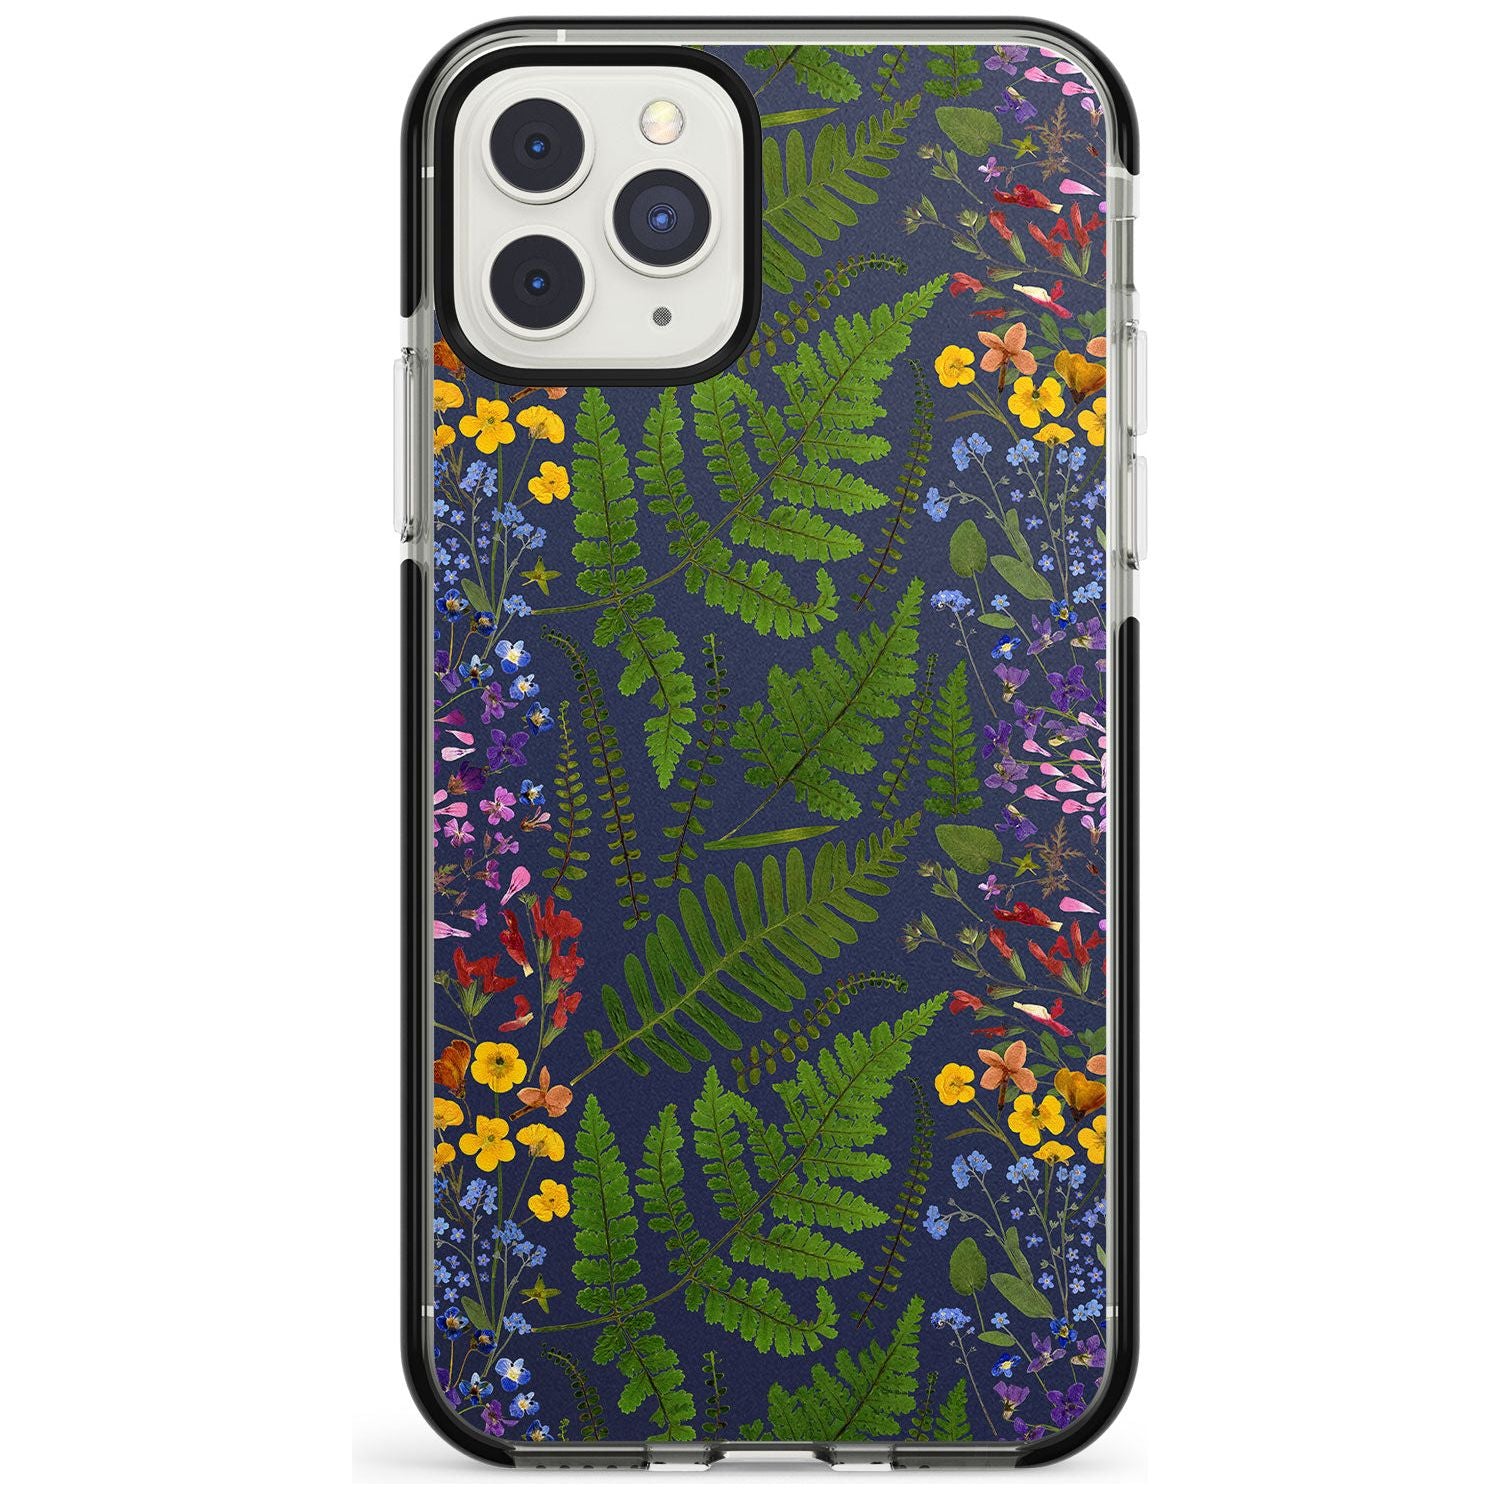 Busy Floral and Fern Design - Navy Black Impact Phone Case for iPhone 11 Pro Max